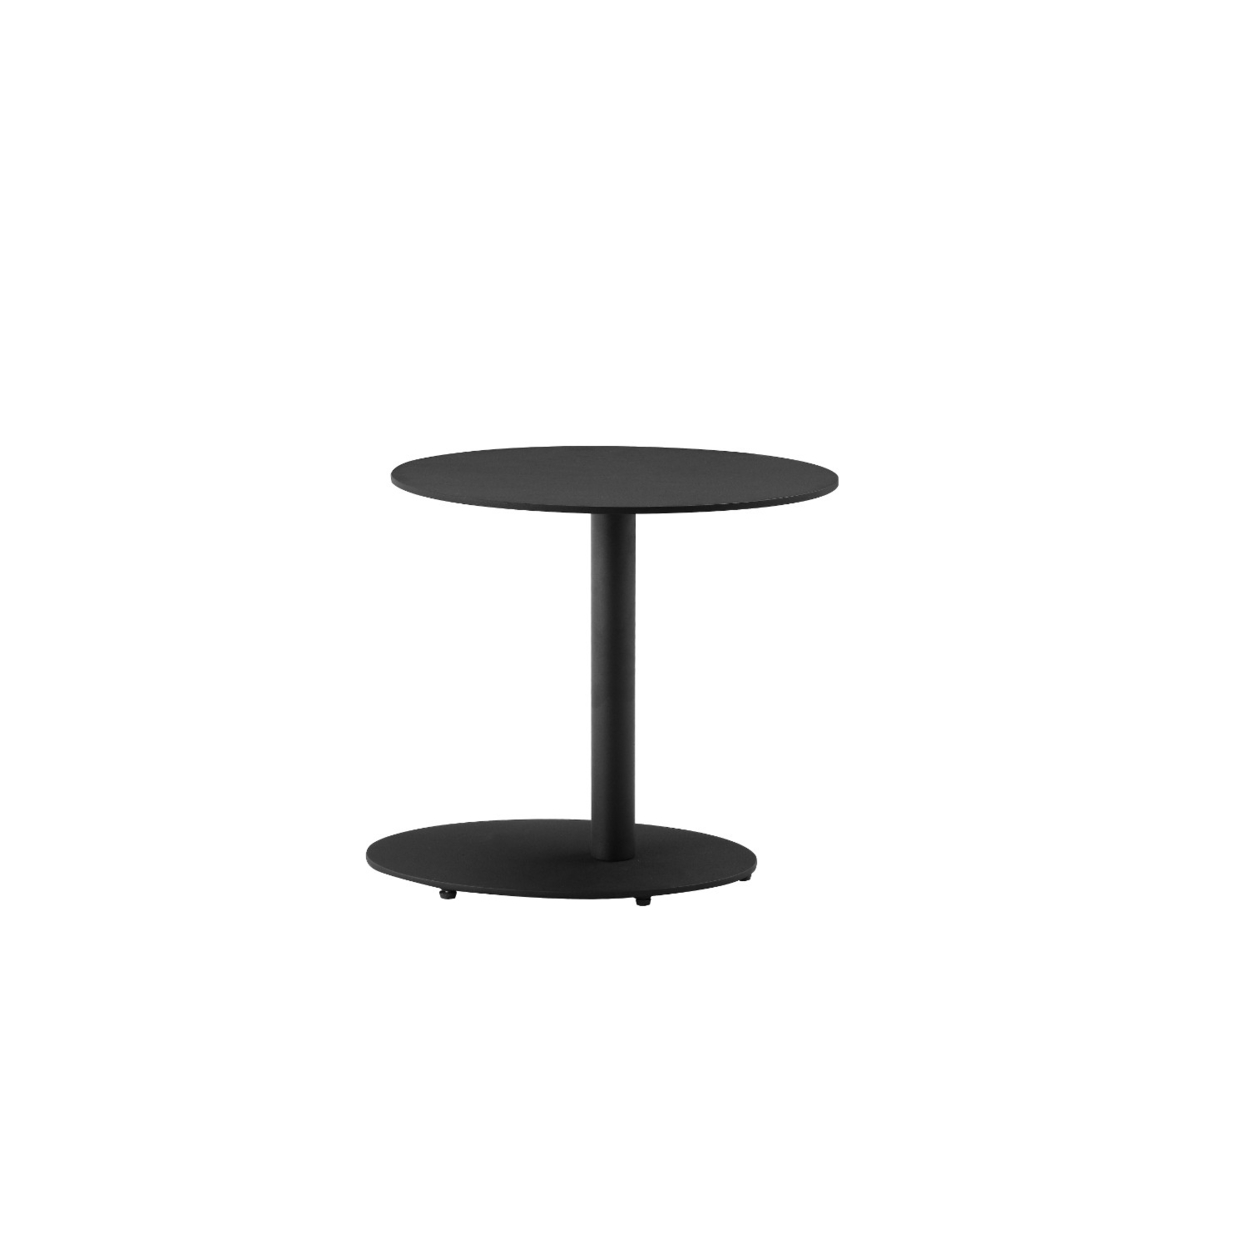 Modern Metal Outdoor Side Table With Oval Top and Base, Black- Saltoro Sherpi - image 2 of 3